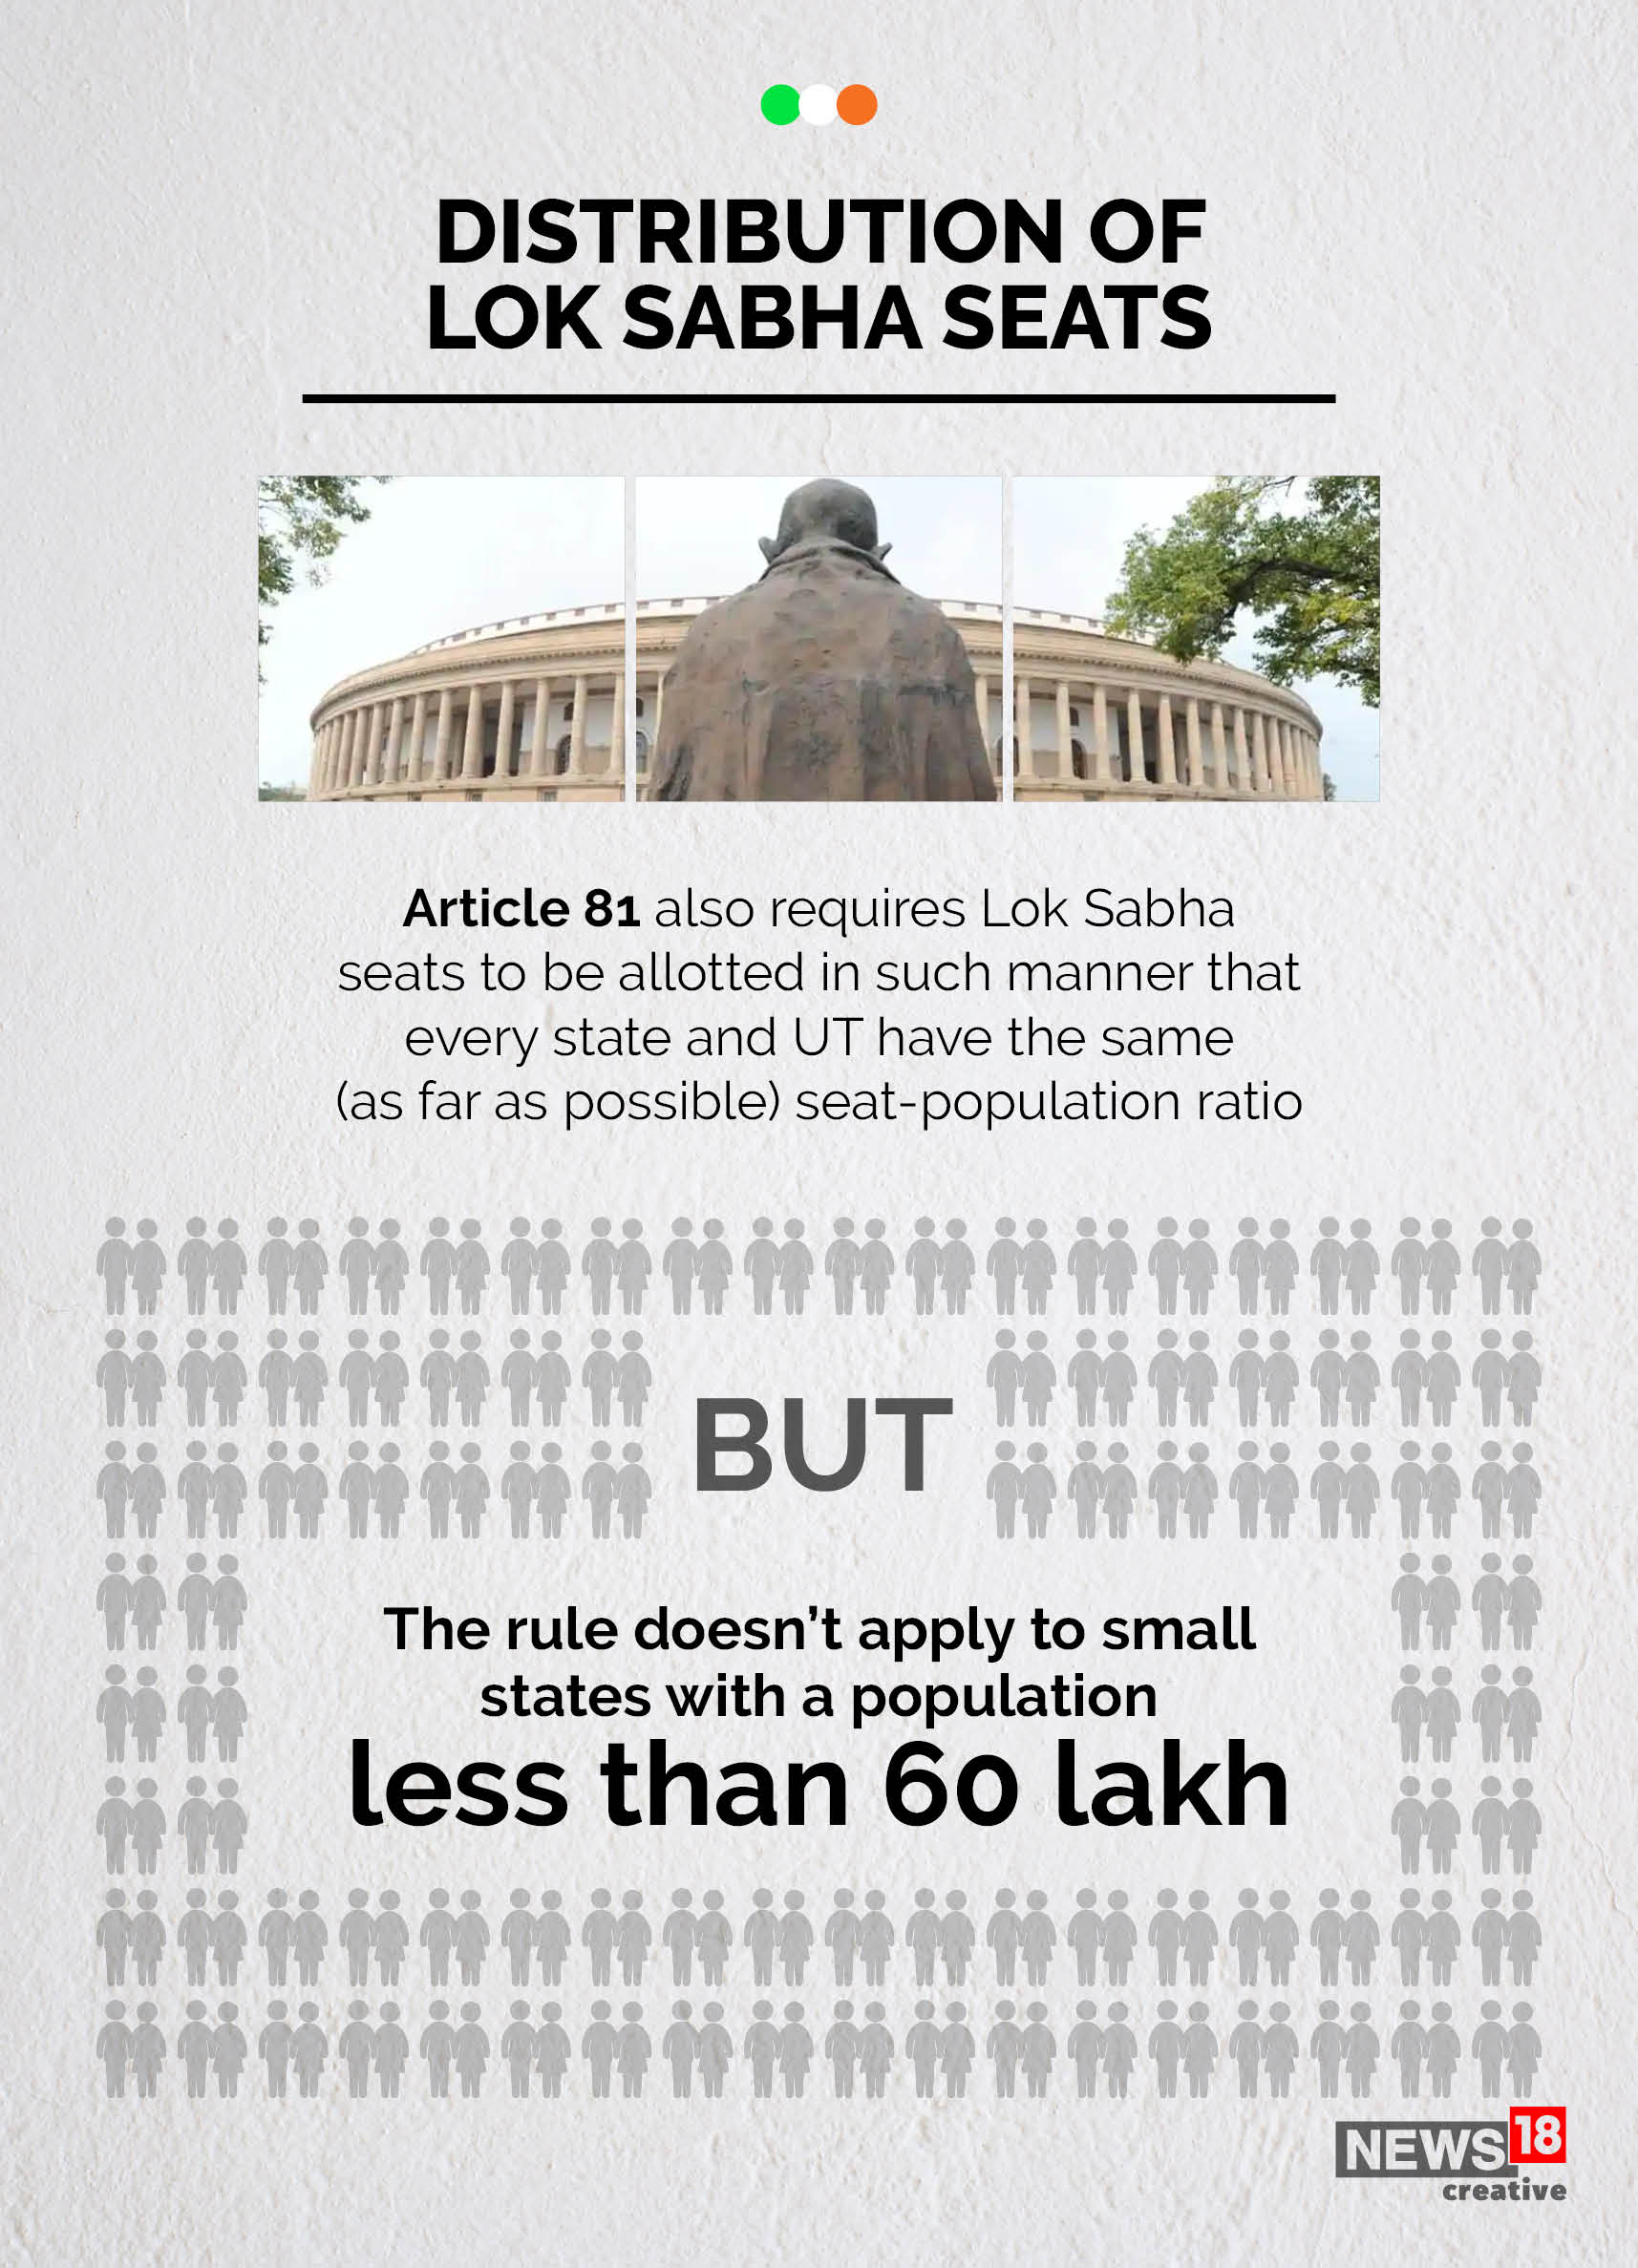 News by Numbers: Why India is making a new Parliament complex